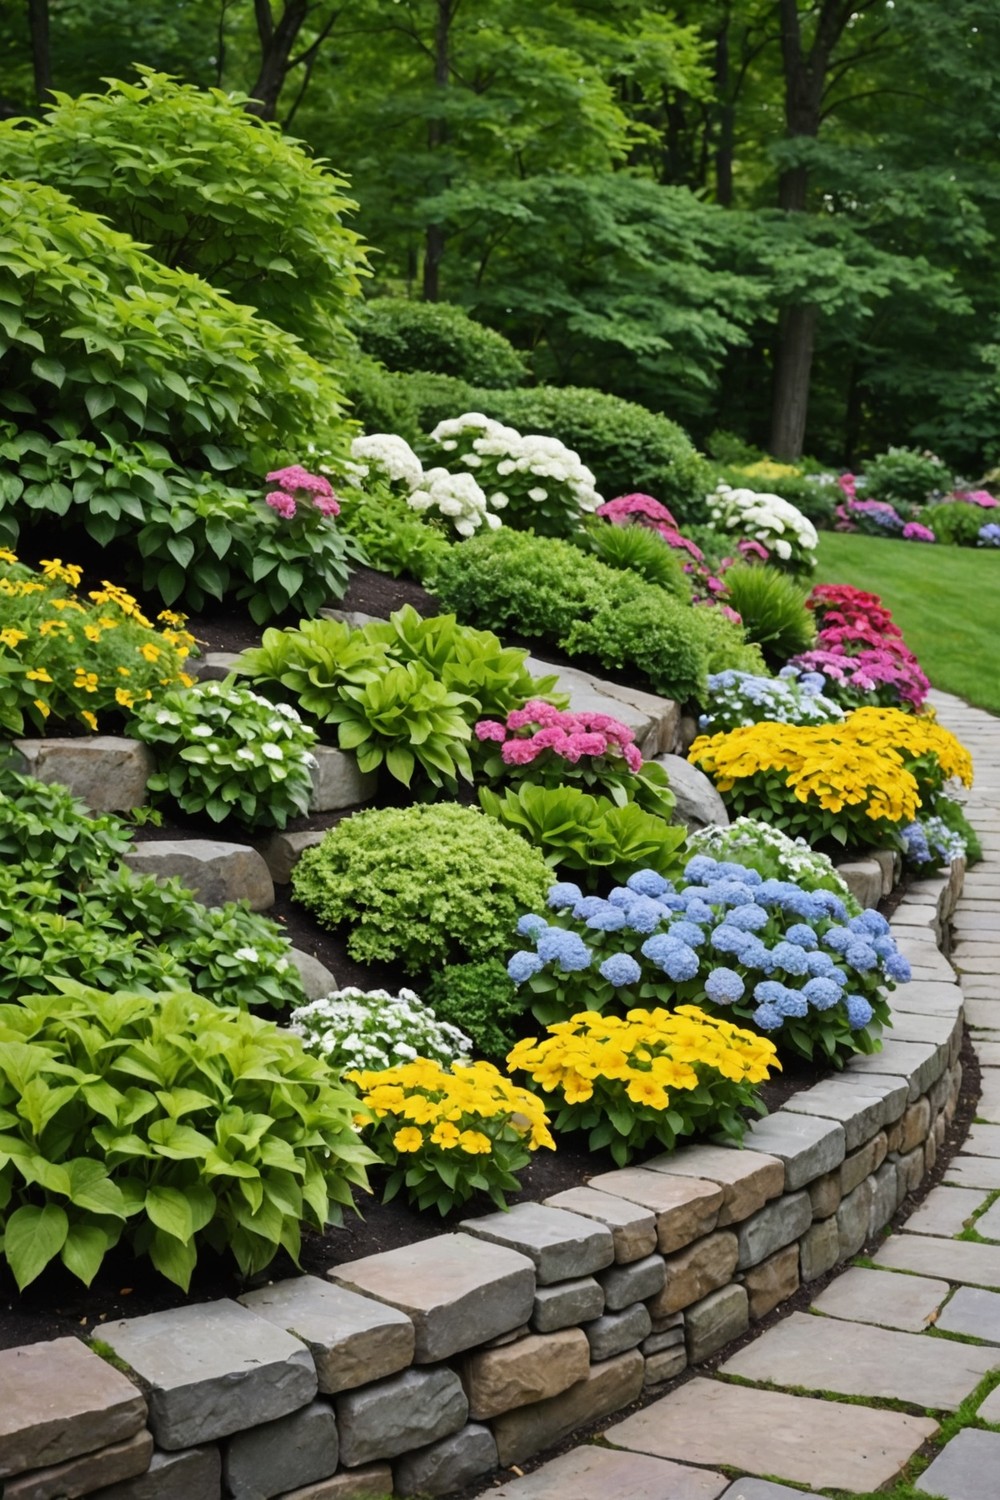 Fieldstone Retaining Wall with Flower Beds